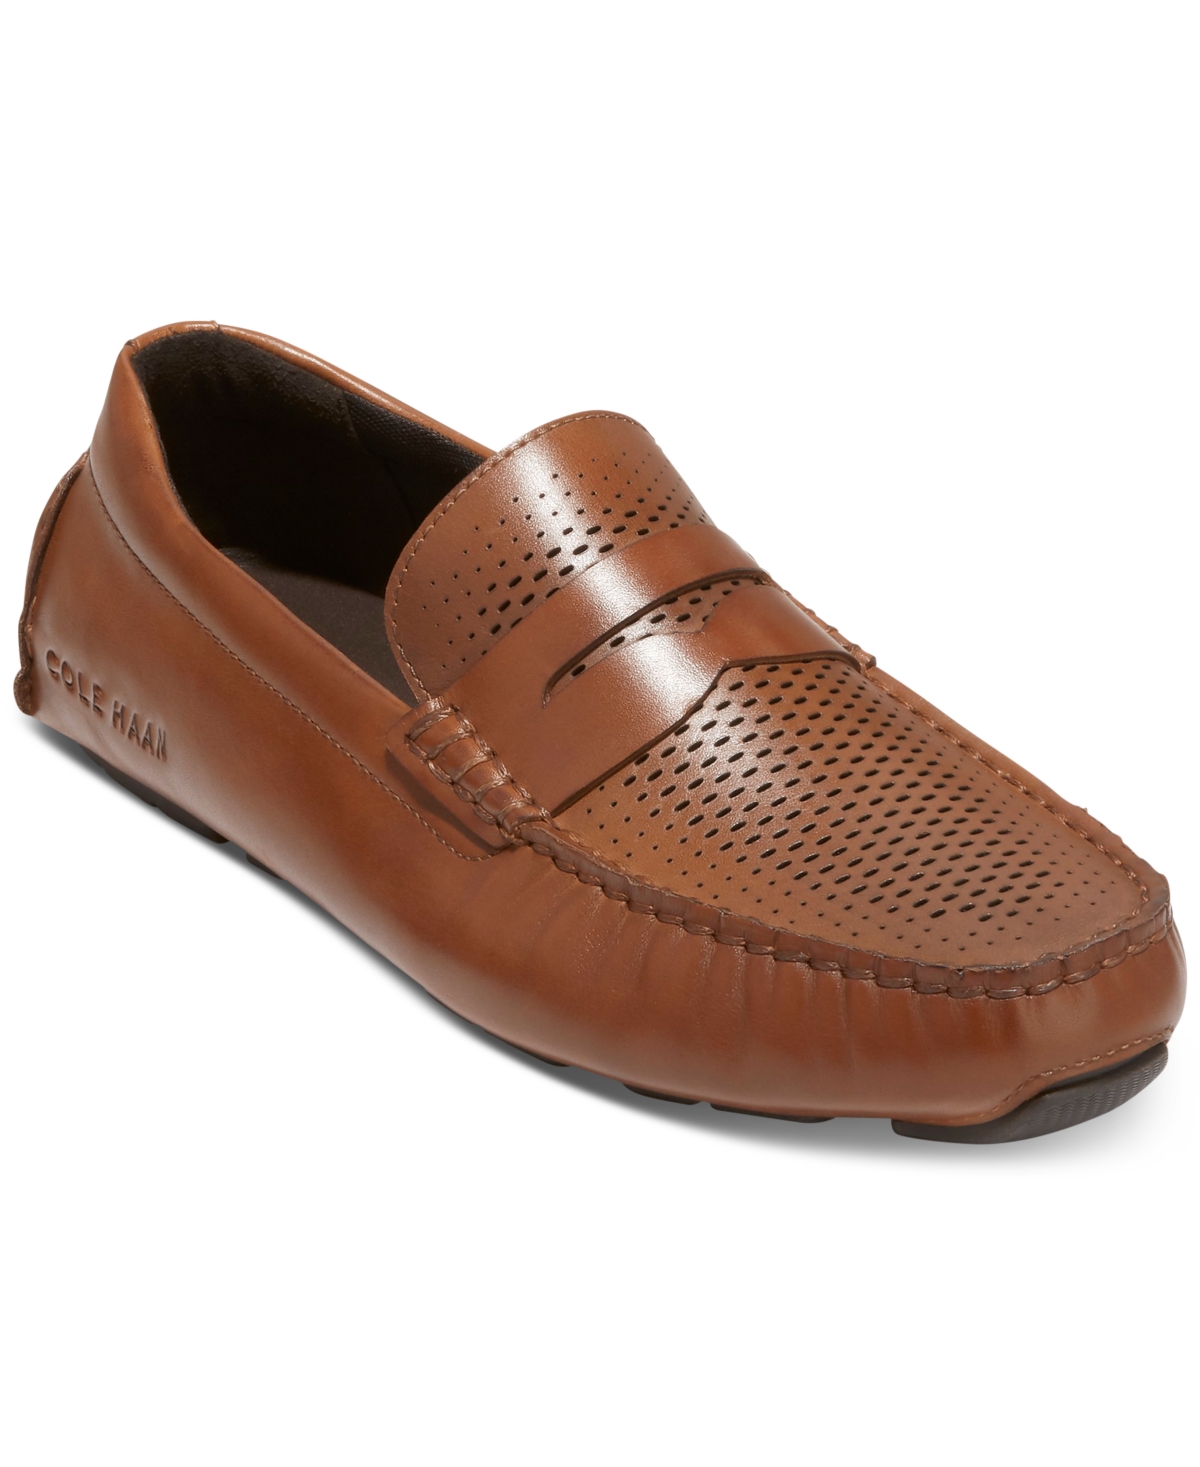 Men's Grand Laser Penny Driving Loafer - Ch British Tan/ch Java